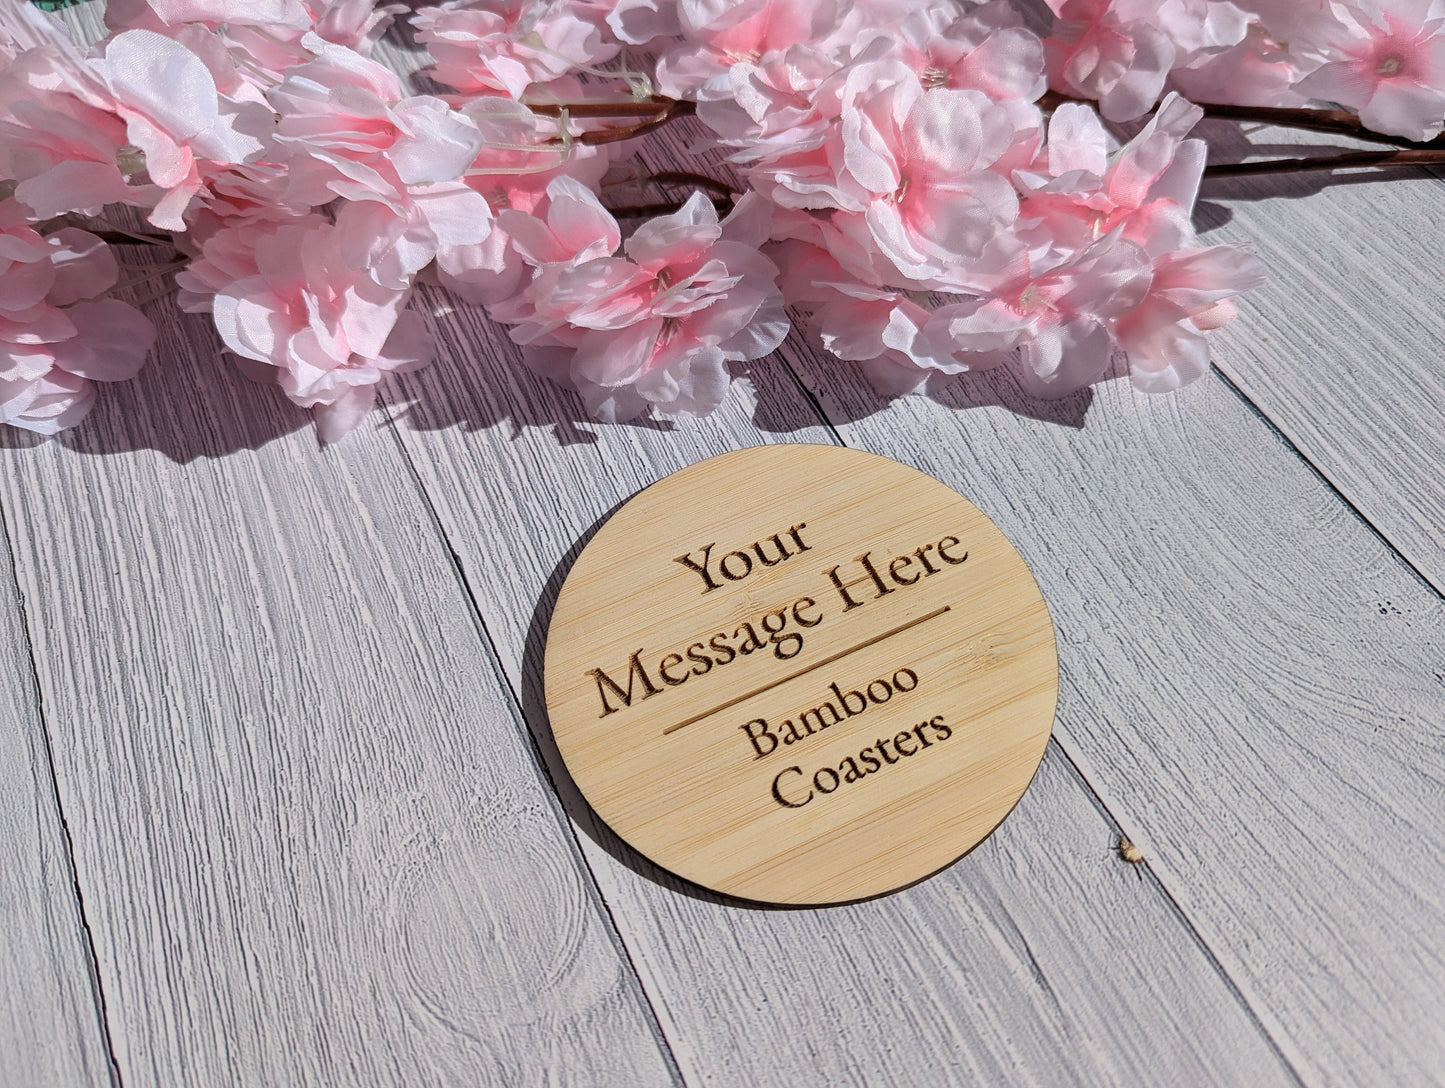 Personalised Bamboo Coasters - Sustainable Gift for Any Occasion, Custom Coasters, Eco Friendly Coasters, Father's Day Gift